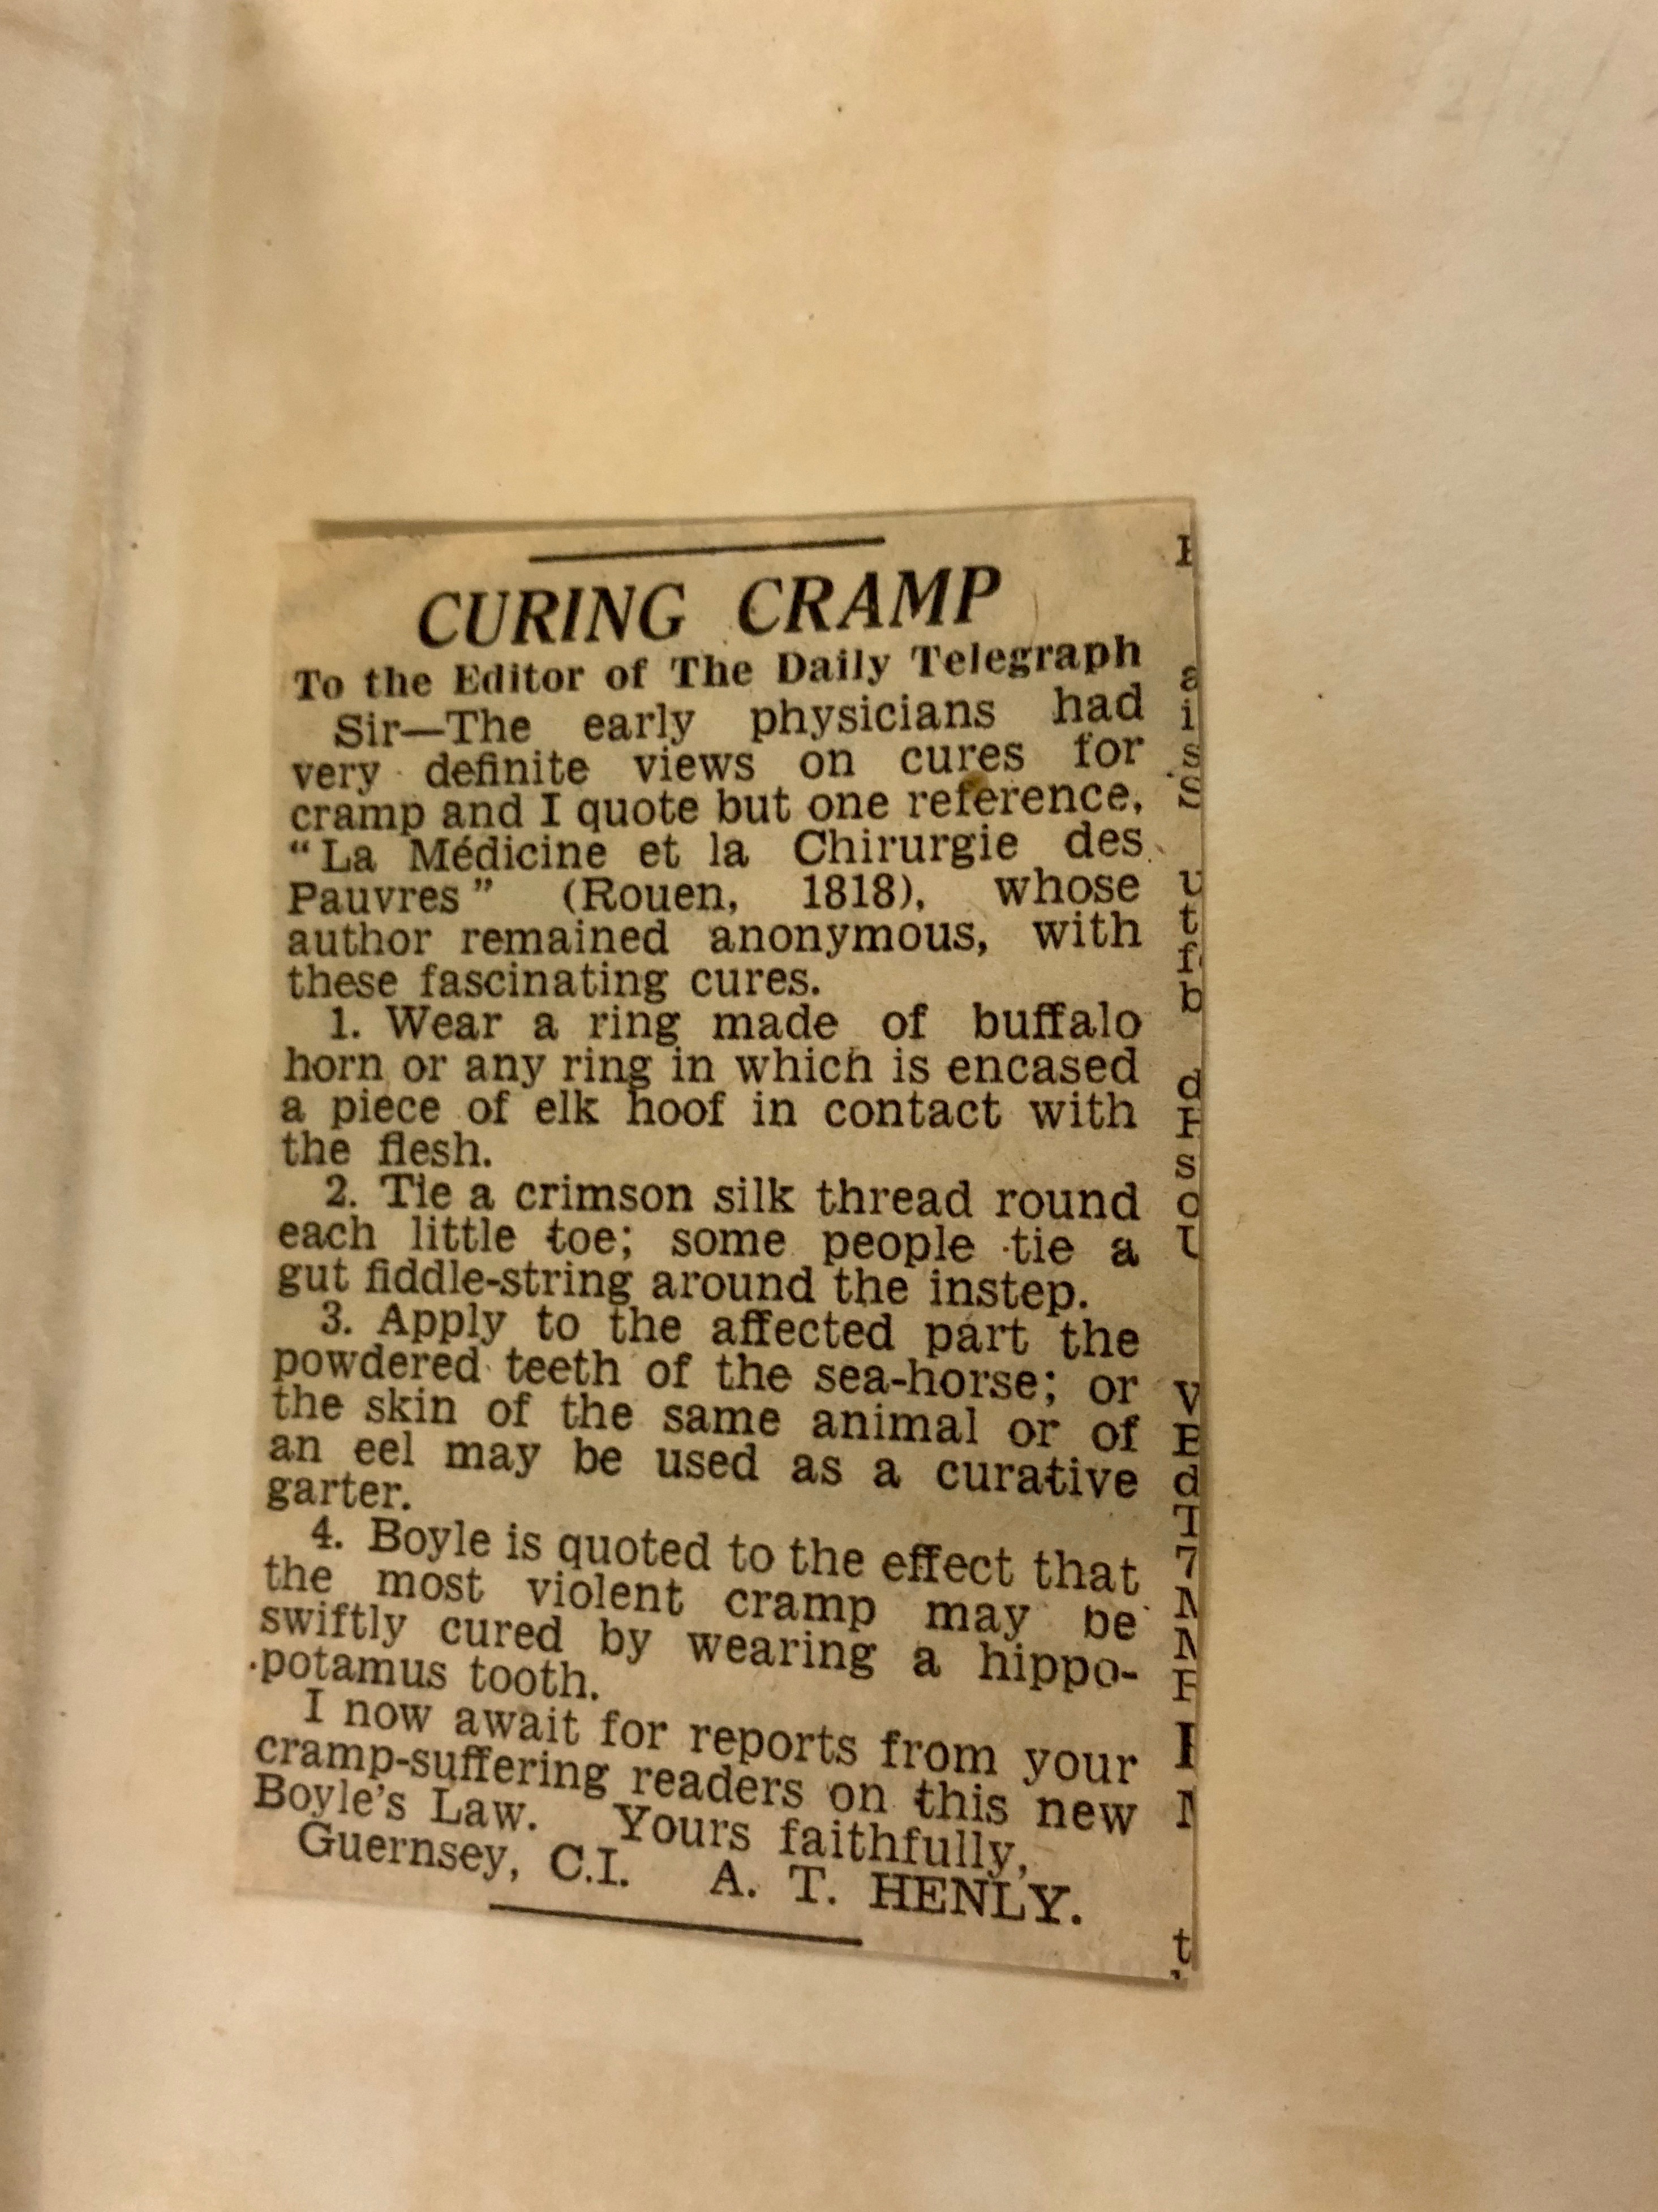 Suggested cures for cramps from ' Medicinal experiments : or, a collection of choice and safe remedies' by Robert Boyle, 1712, London. (Maddison Collection, F10463800)